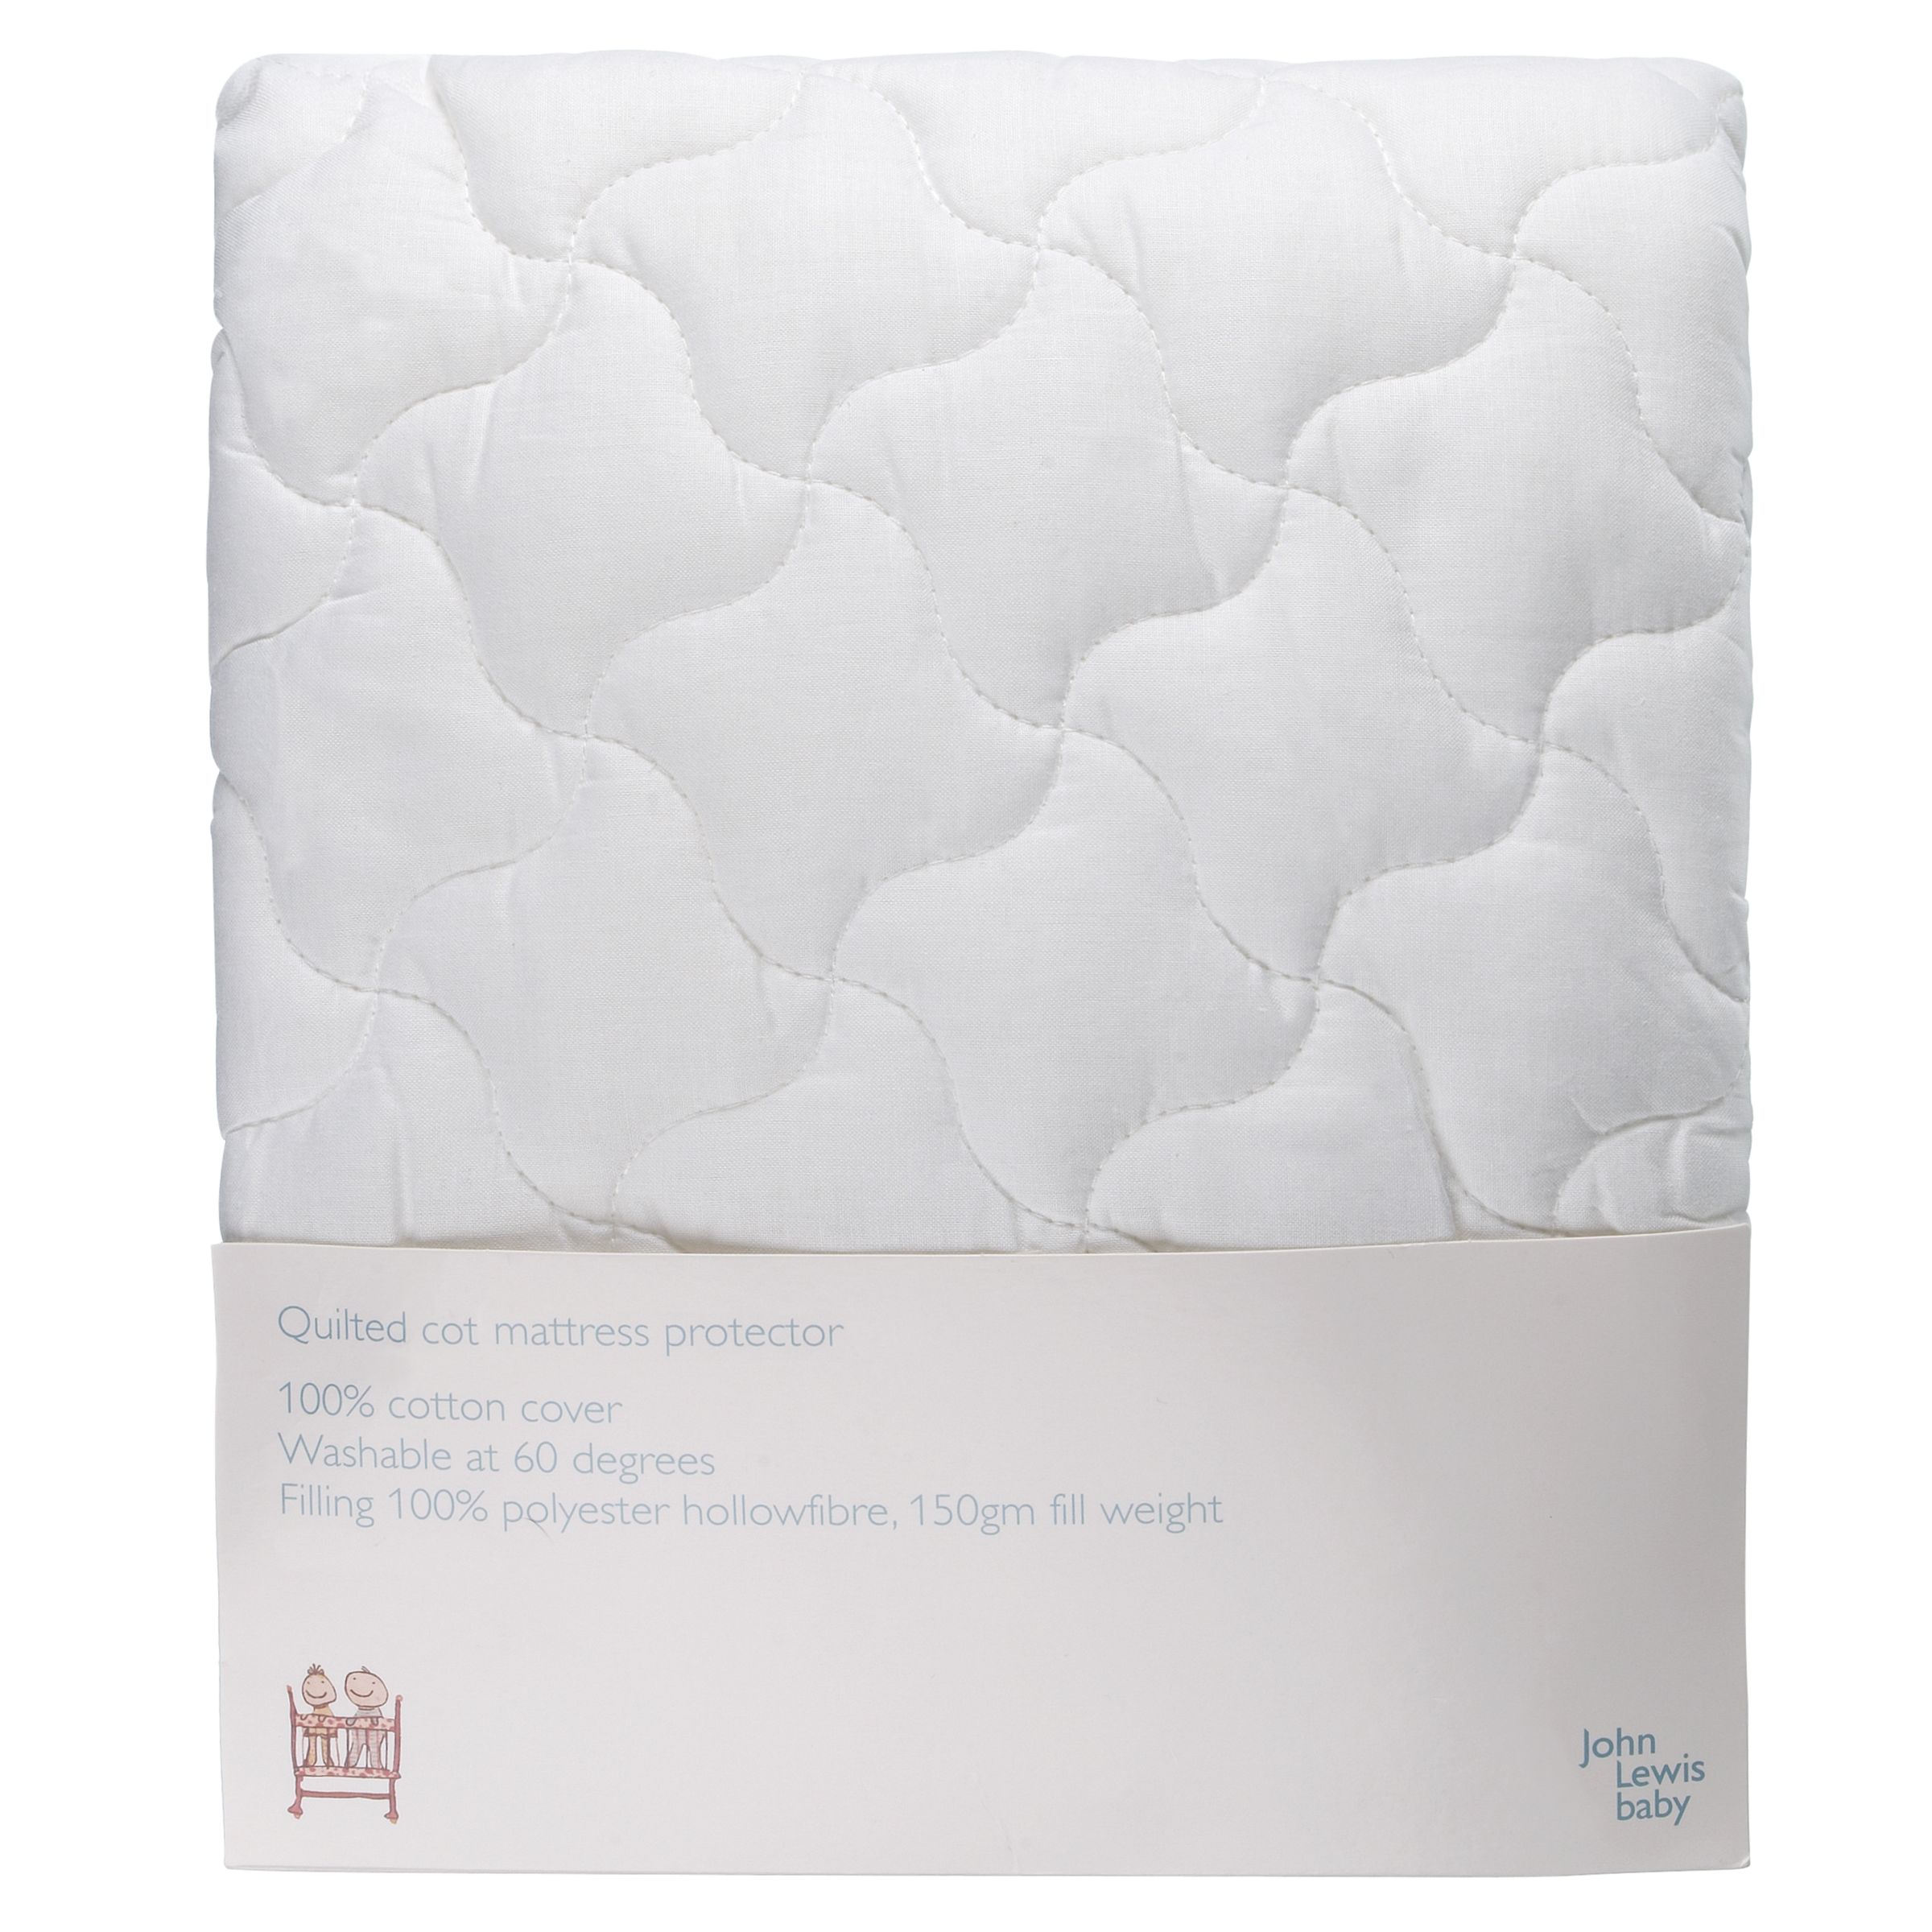 John Lewis Baby Quilted Cot Mattress Protector,